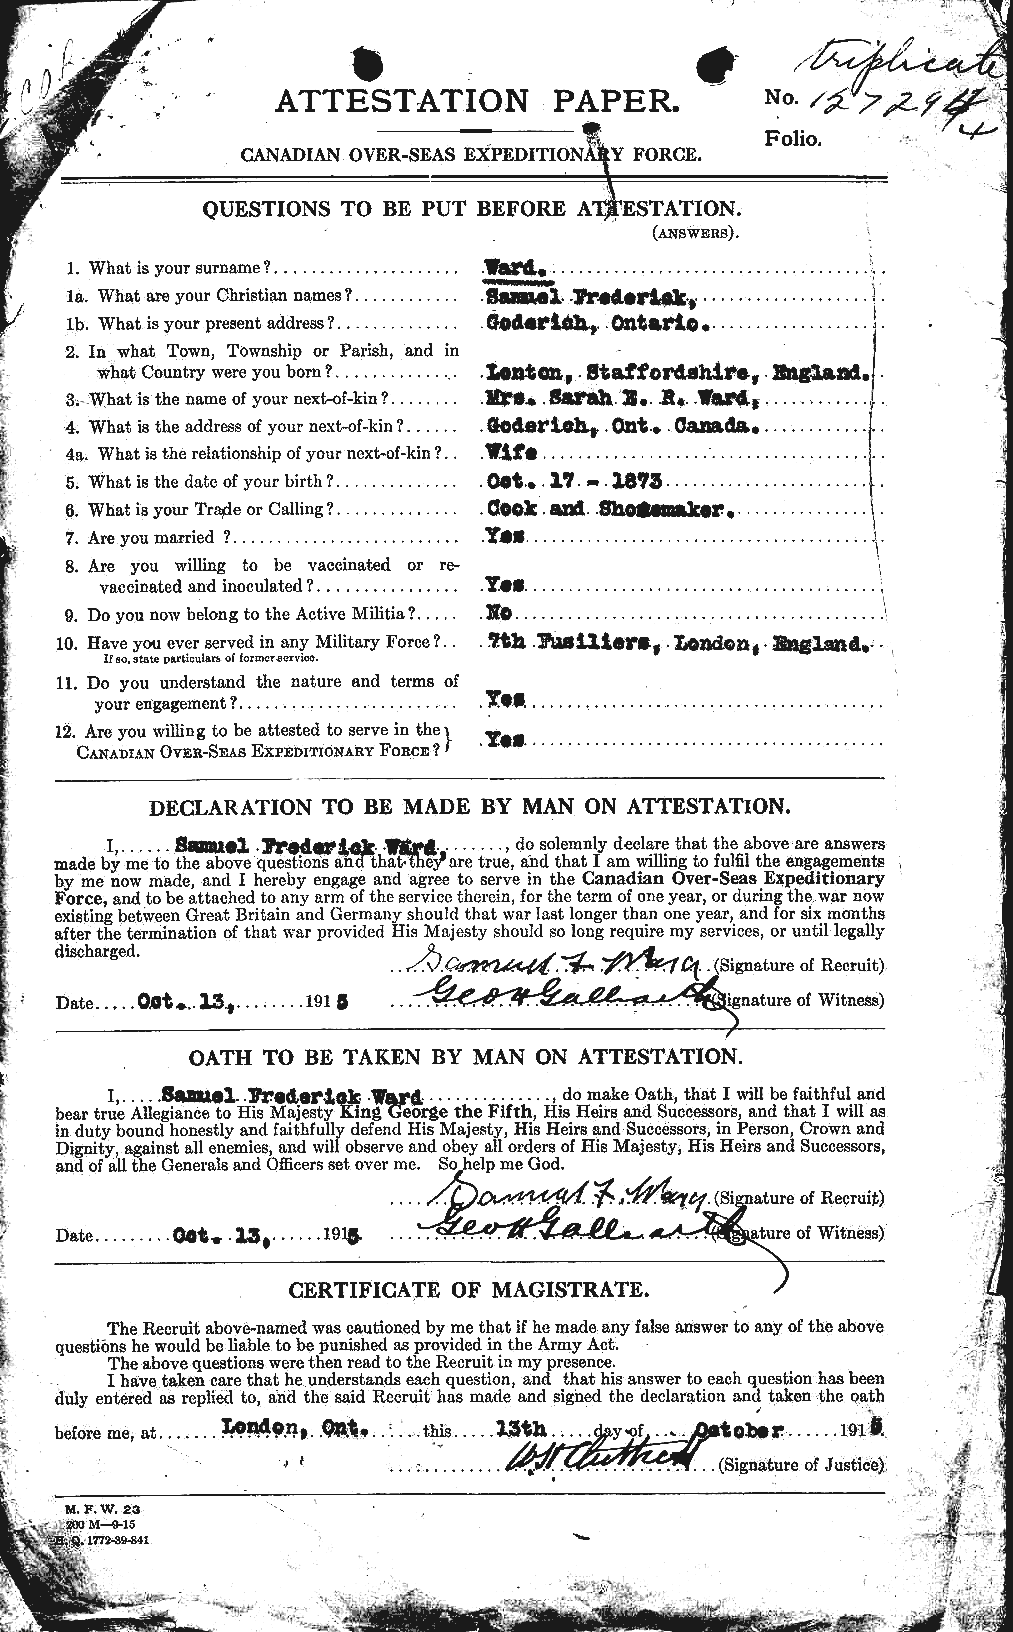 Personnel Records of the First World War - CEF 659682a